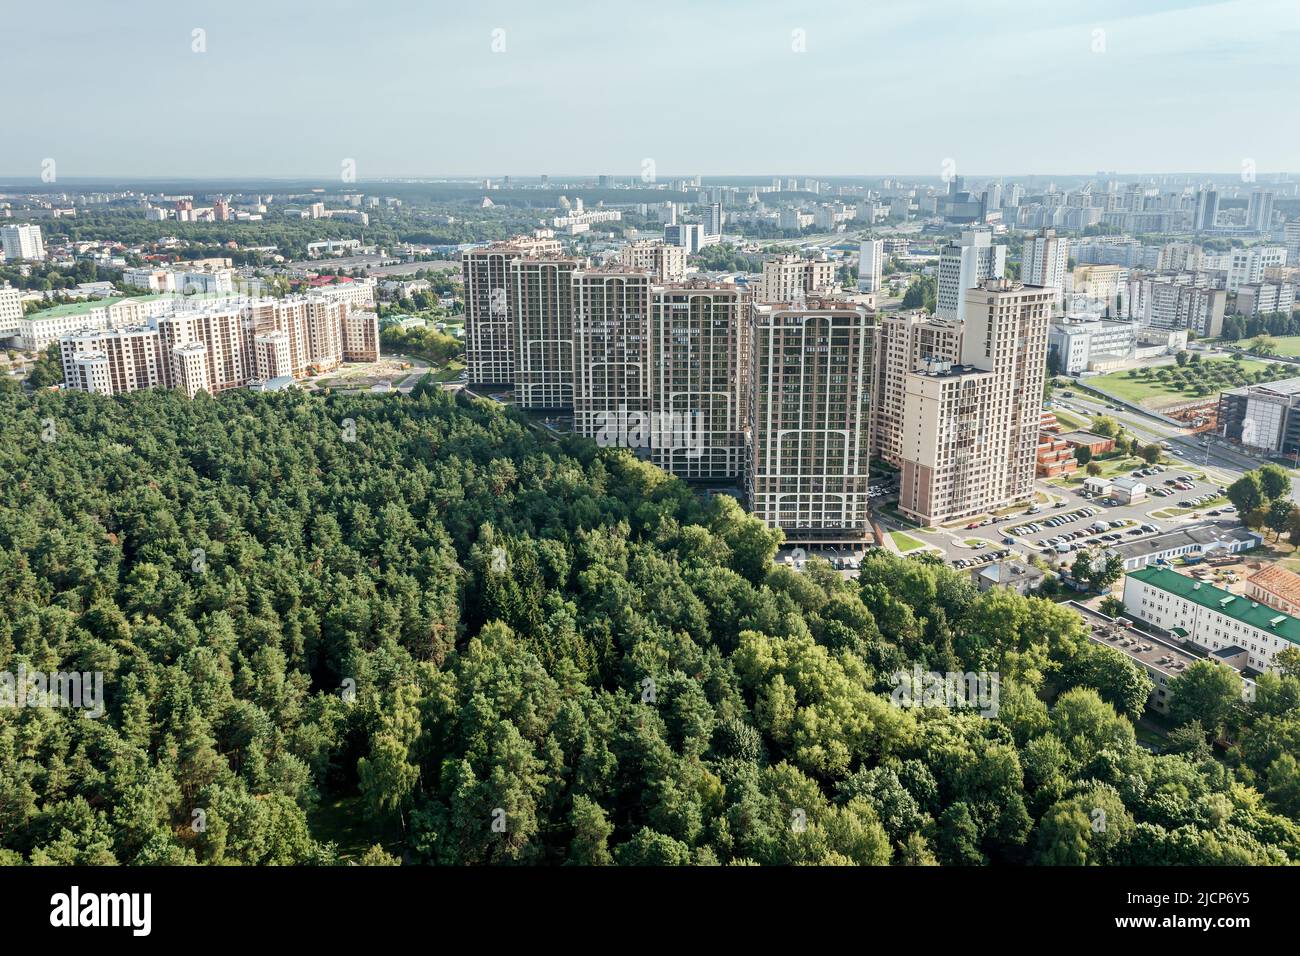 newly constructed housing estate near city park. aerial panoramic view. Stock Photo